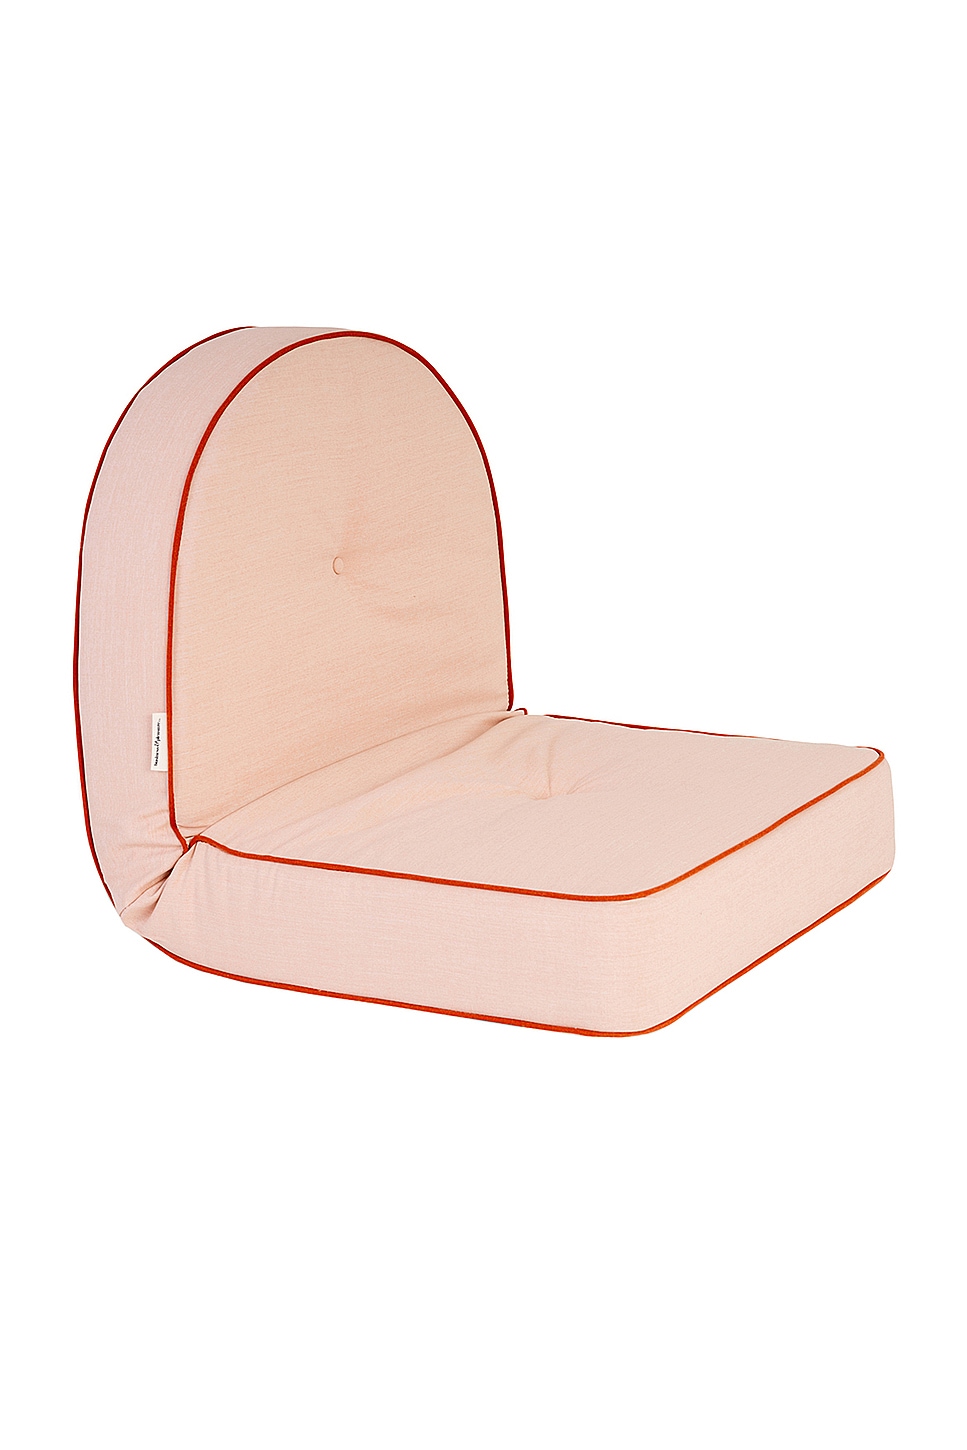 Image 1 of business & pleasure co. Reclining Pillow Lounger in Riviera Pink